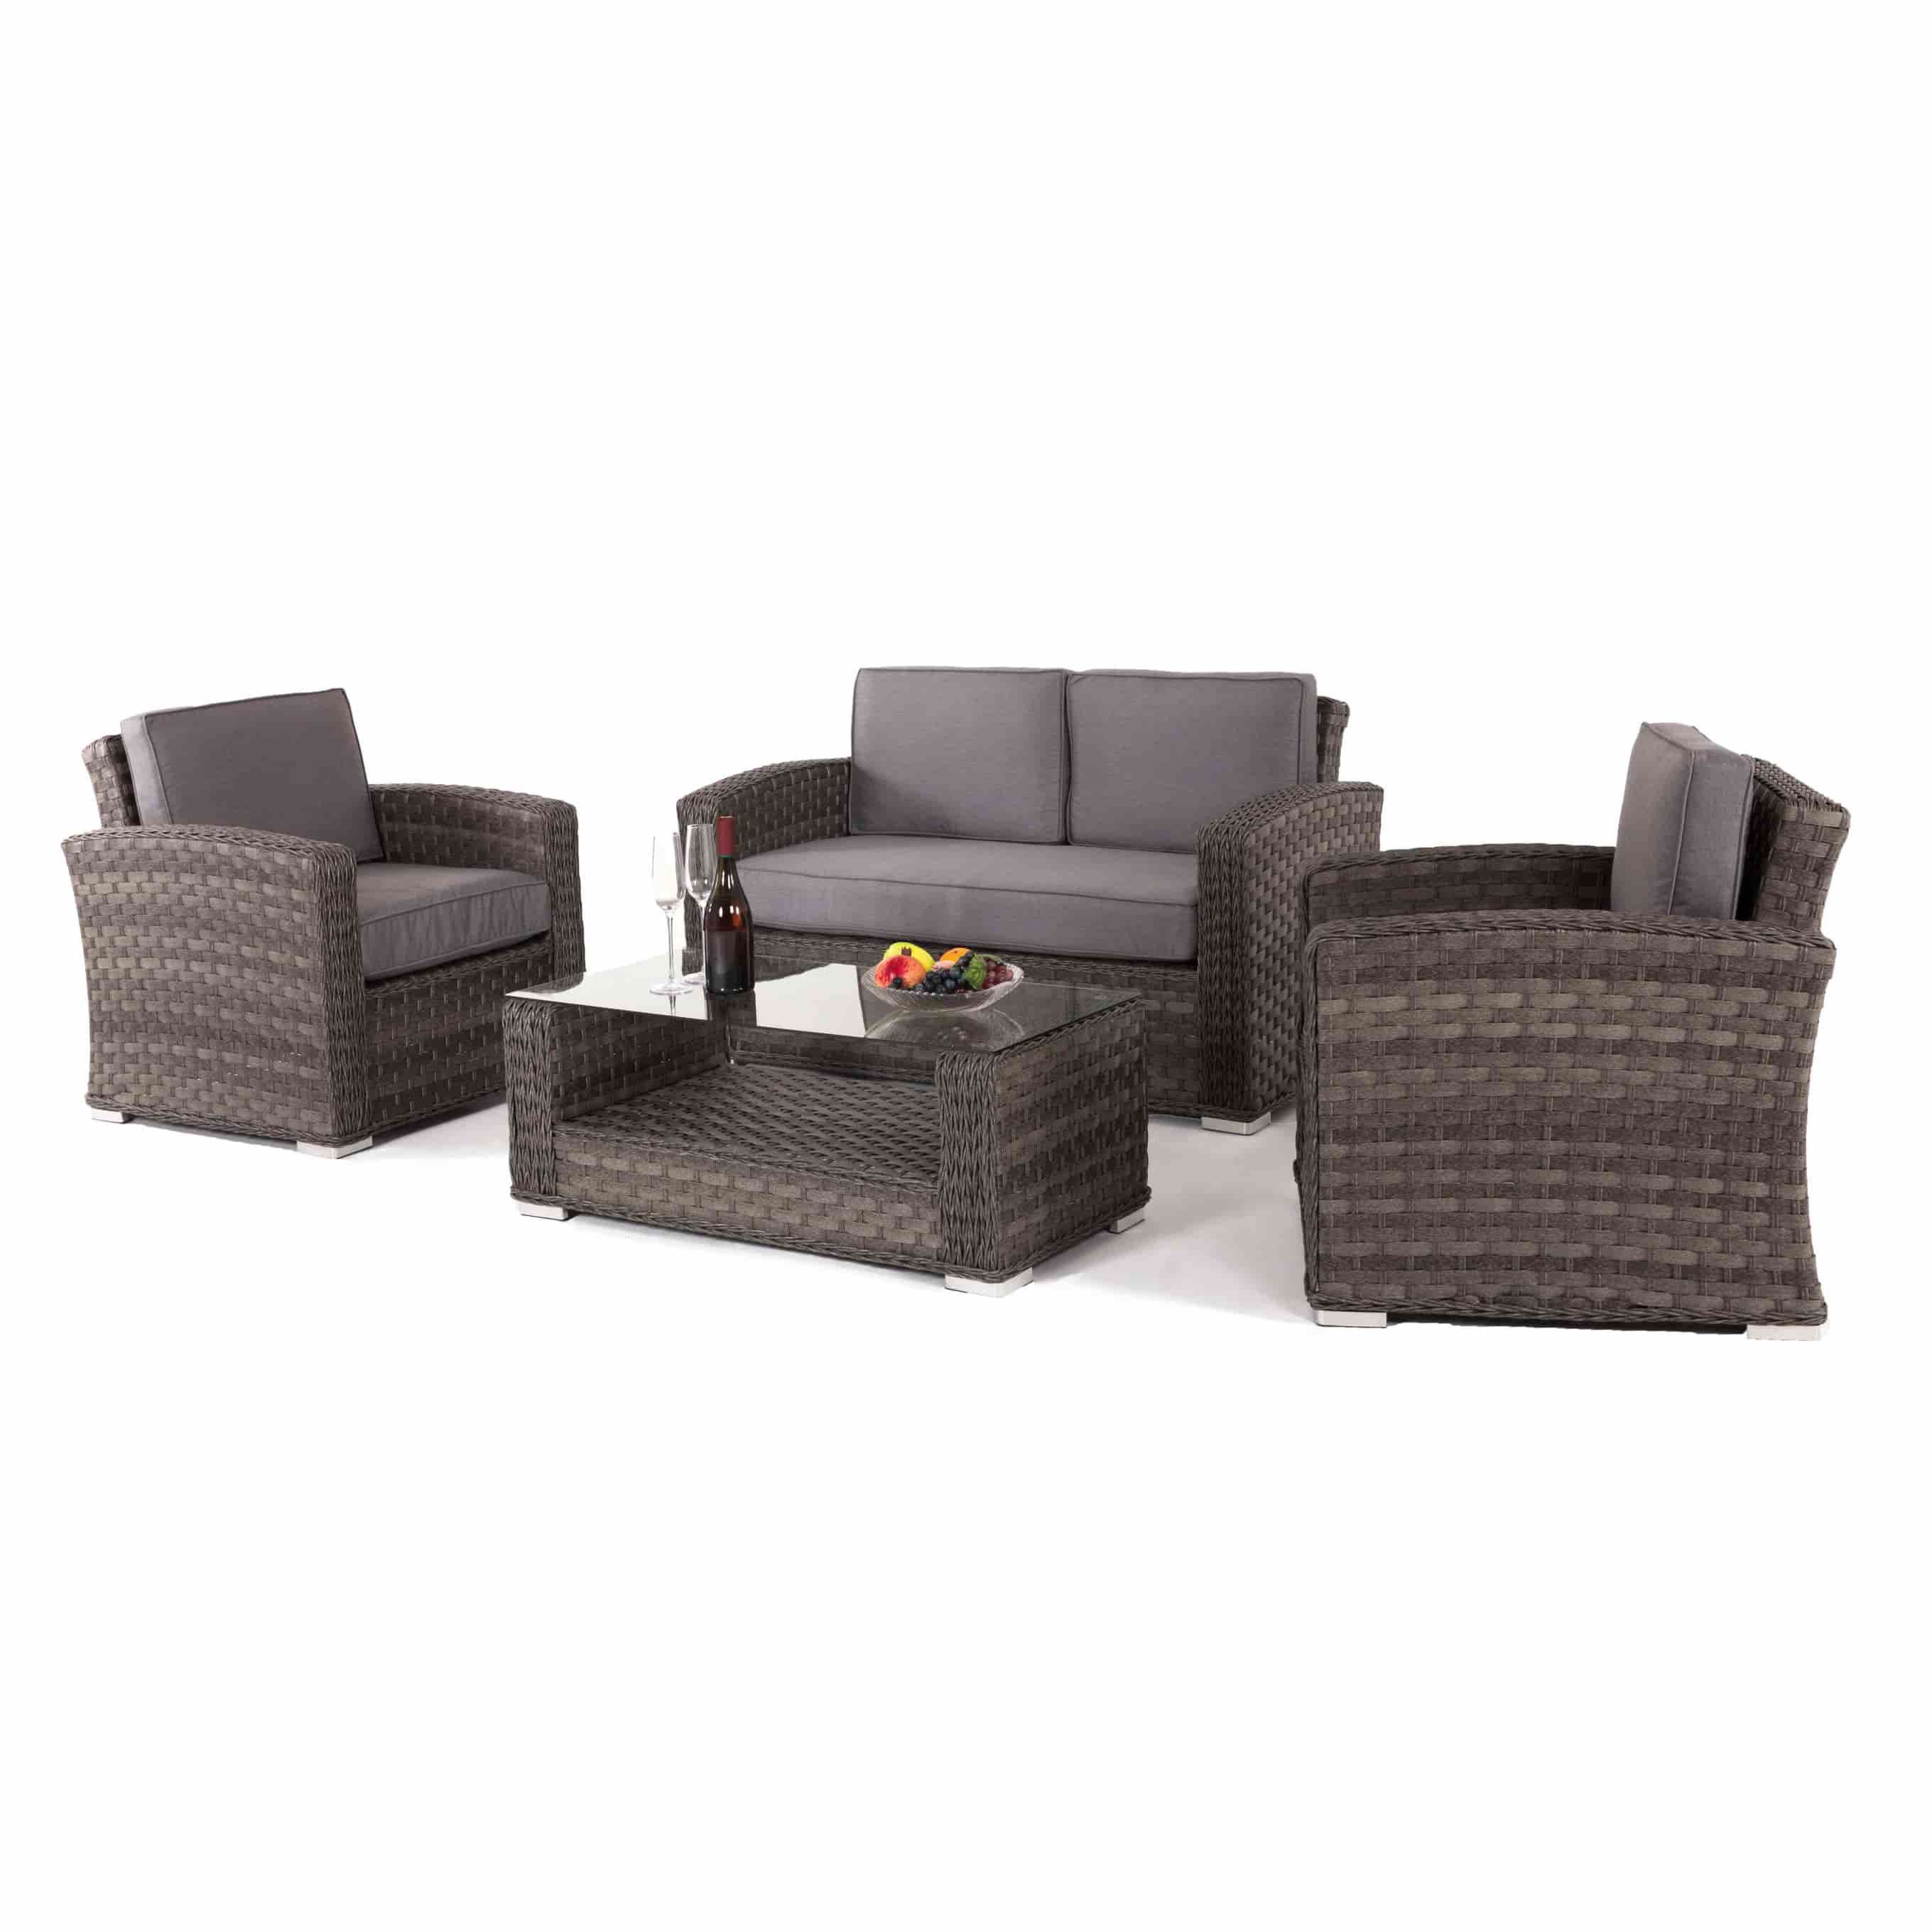 Grey rattan 2 seat sofa set with two armchairs and a matching coffee table with glass table top